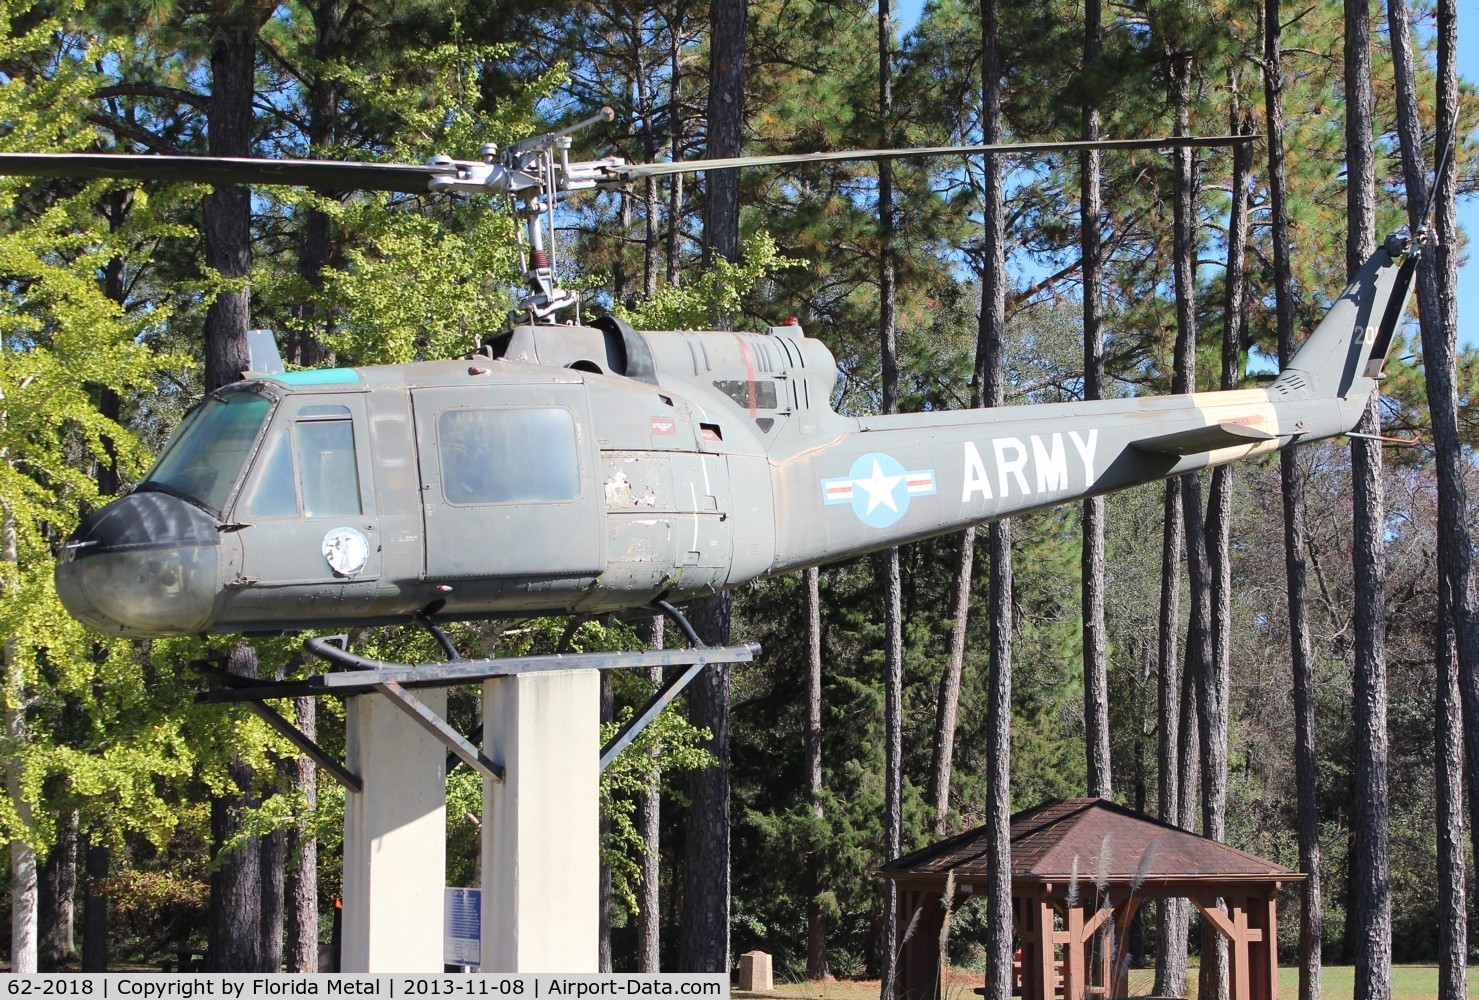 62-2018, 1962 Bell UH-1B Iroquois C/N 538, UH-1B at Alabama welcome station